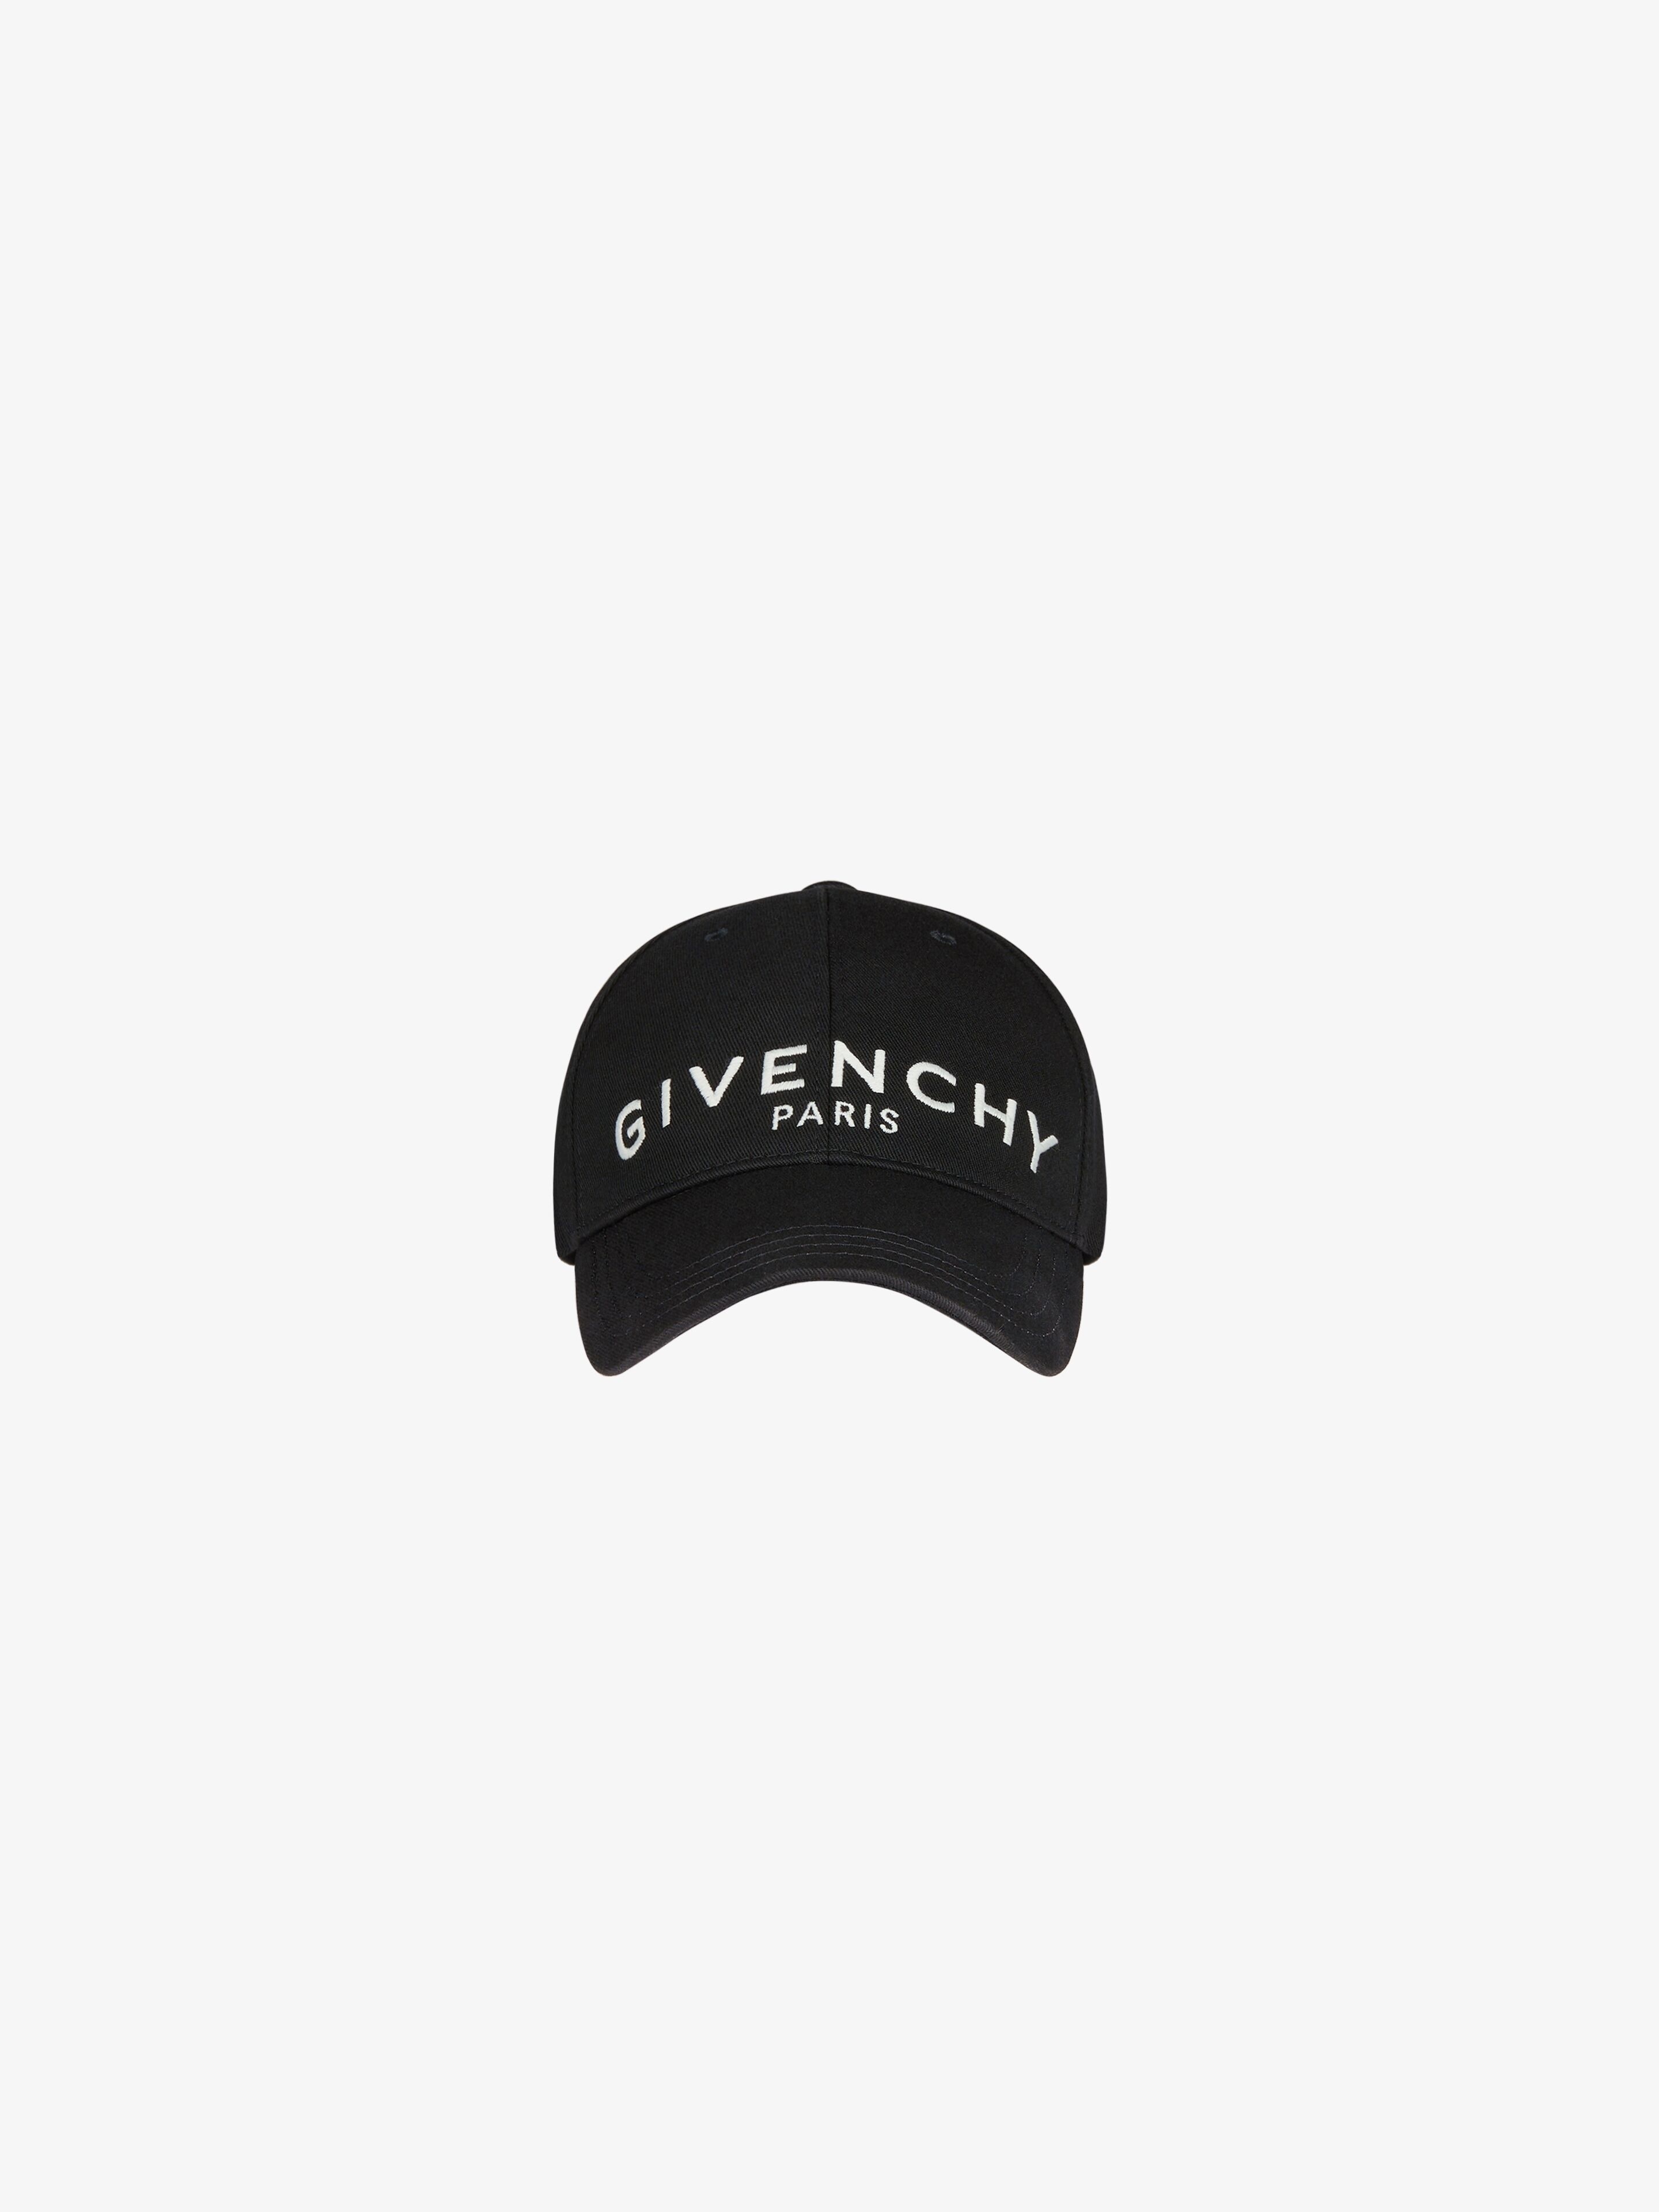 GIVENCHY PARIS EMBROIDERED CAP - 1